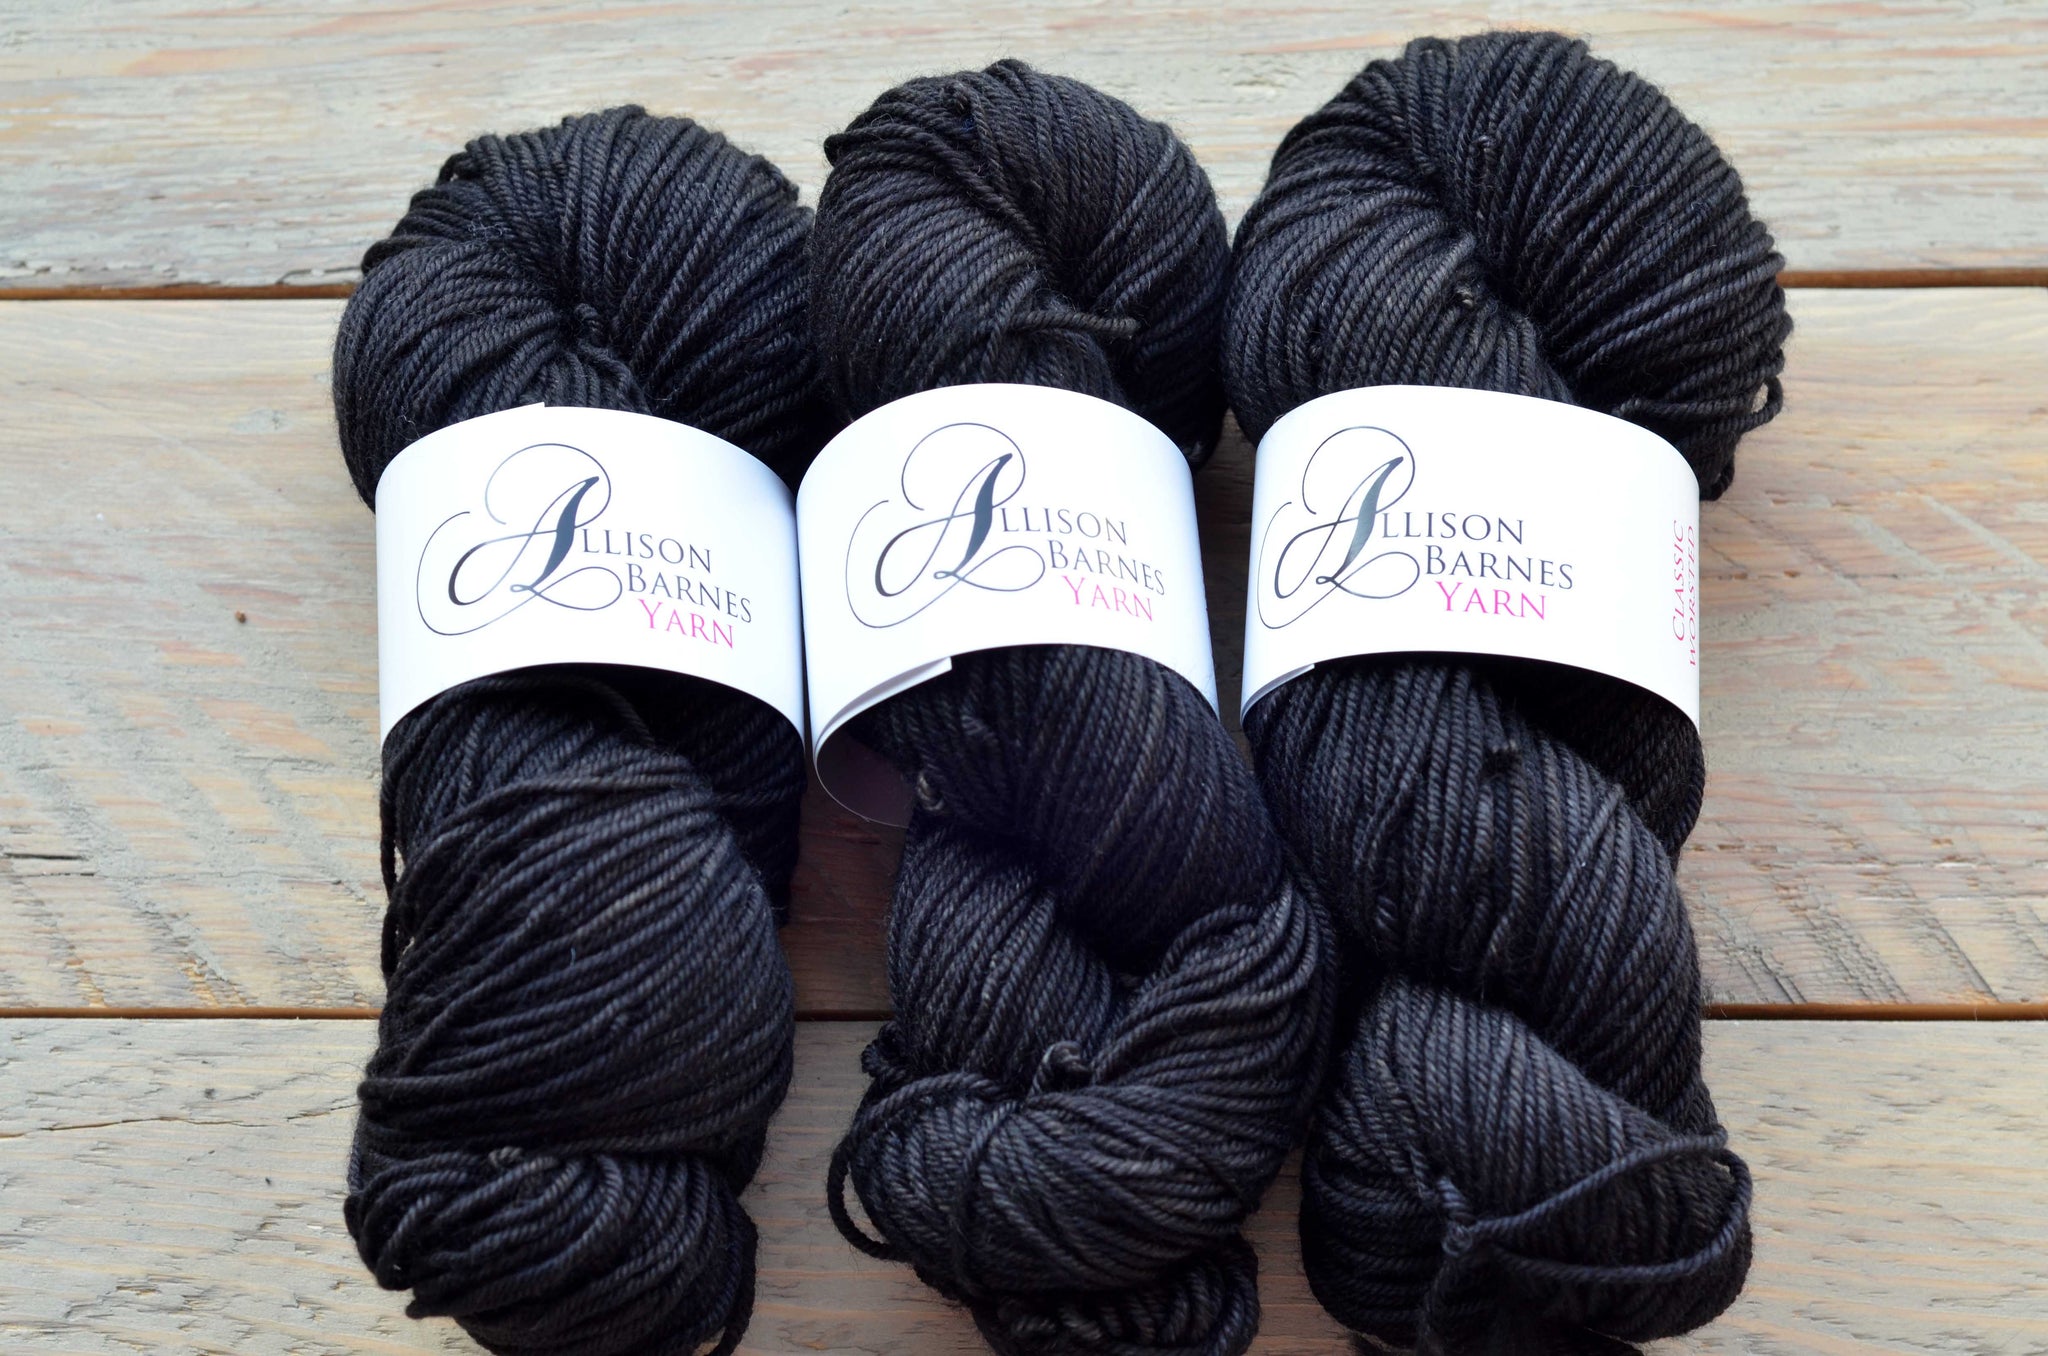 Paint it Black on Classic Worsted